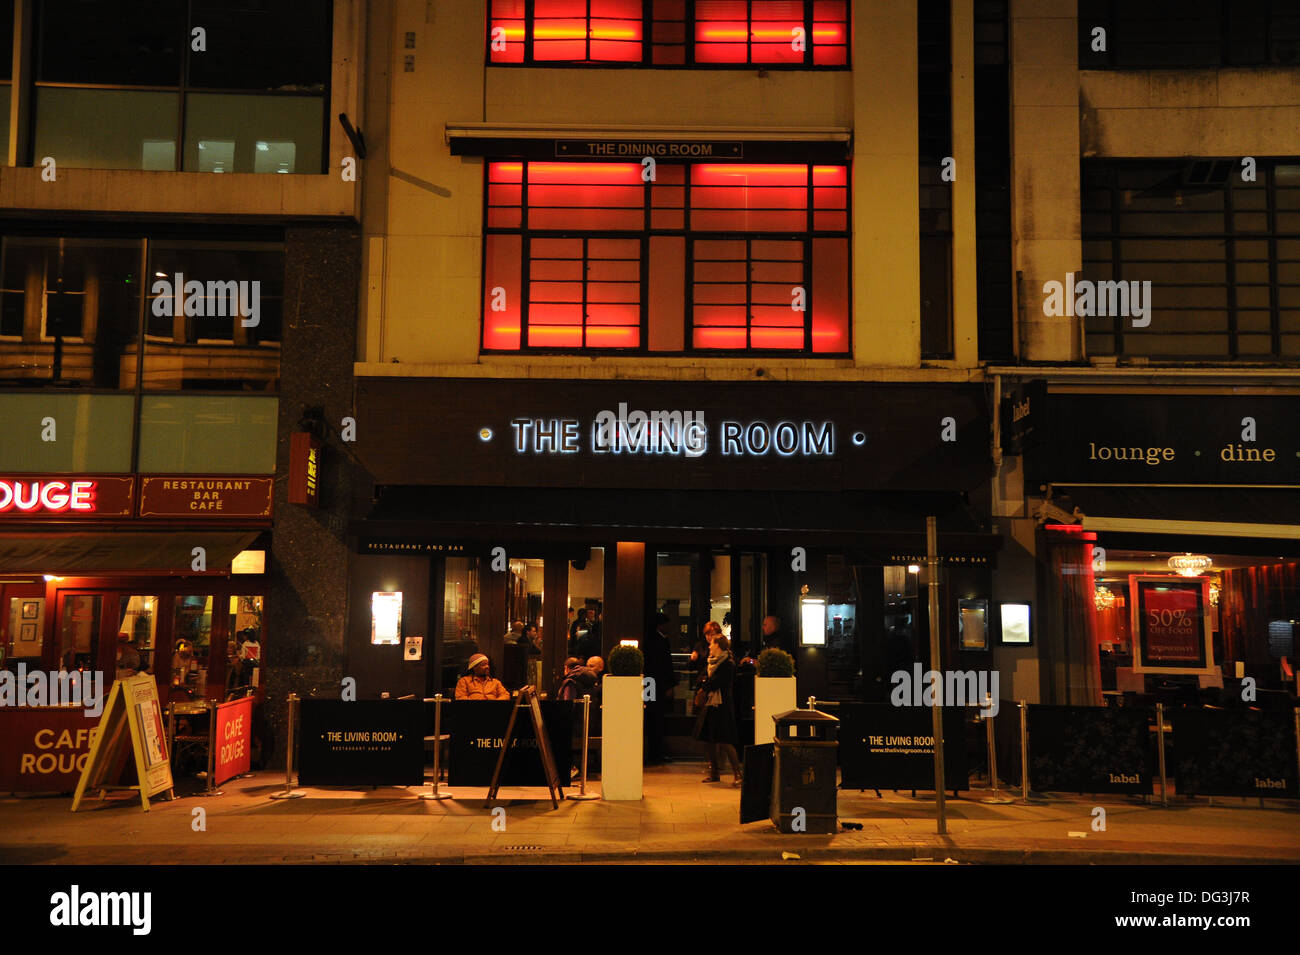 Living Room Restaurant And Bar At Night Manchester